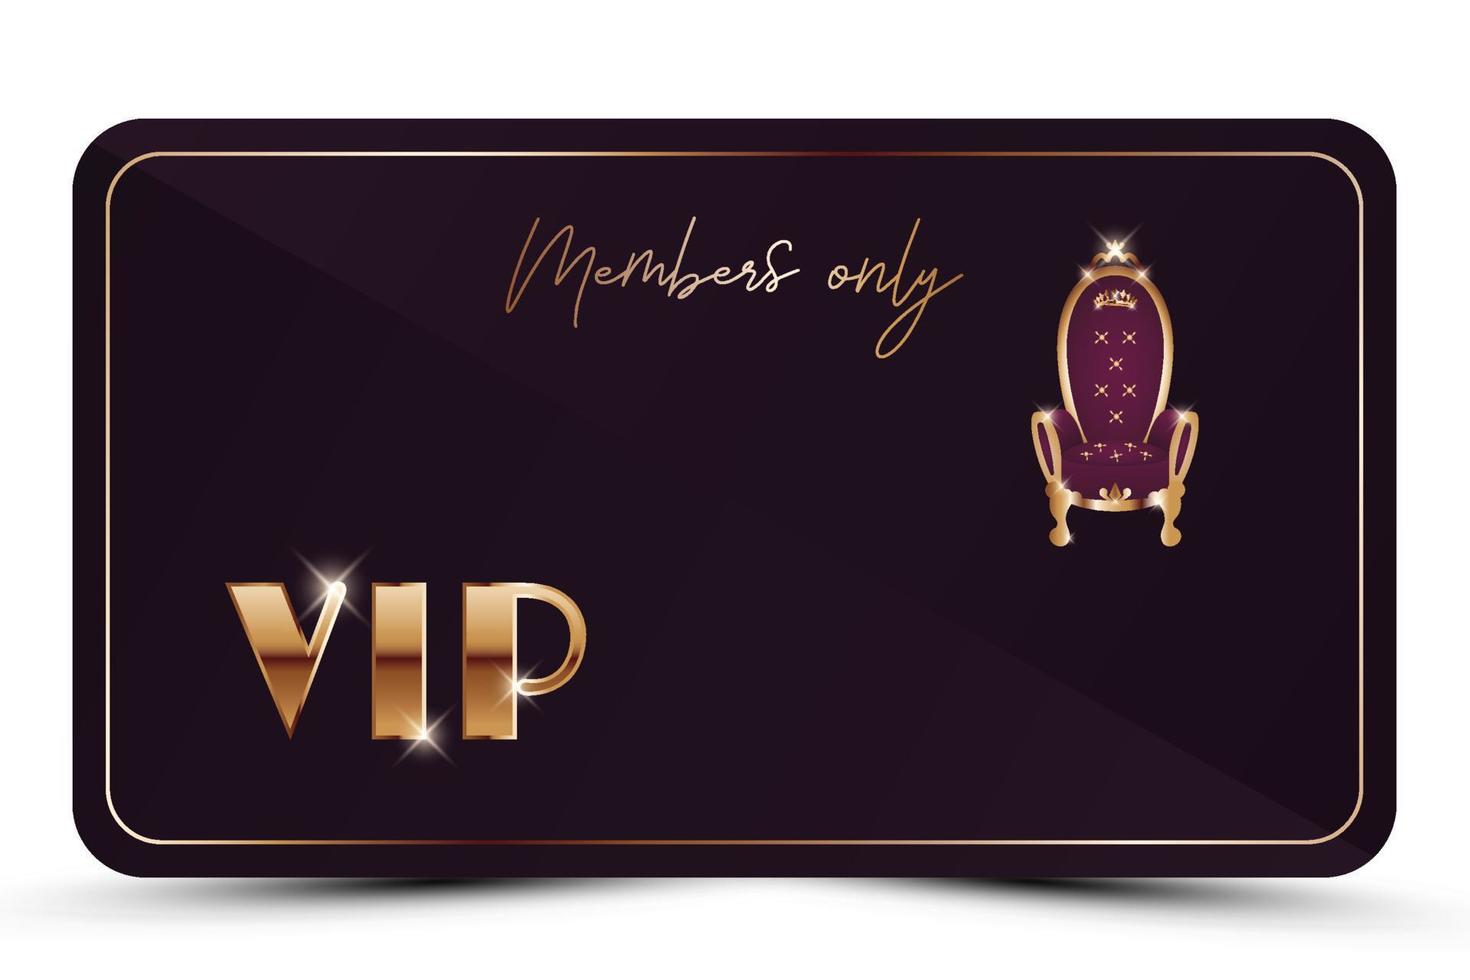 WebViolet elegant vip card. Modern burgundy business card with golden 3d text, crown, vintage royal throne. Luxury abstract invitation. Vector illustration for loyalty, bonus card, gift certificate